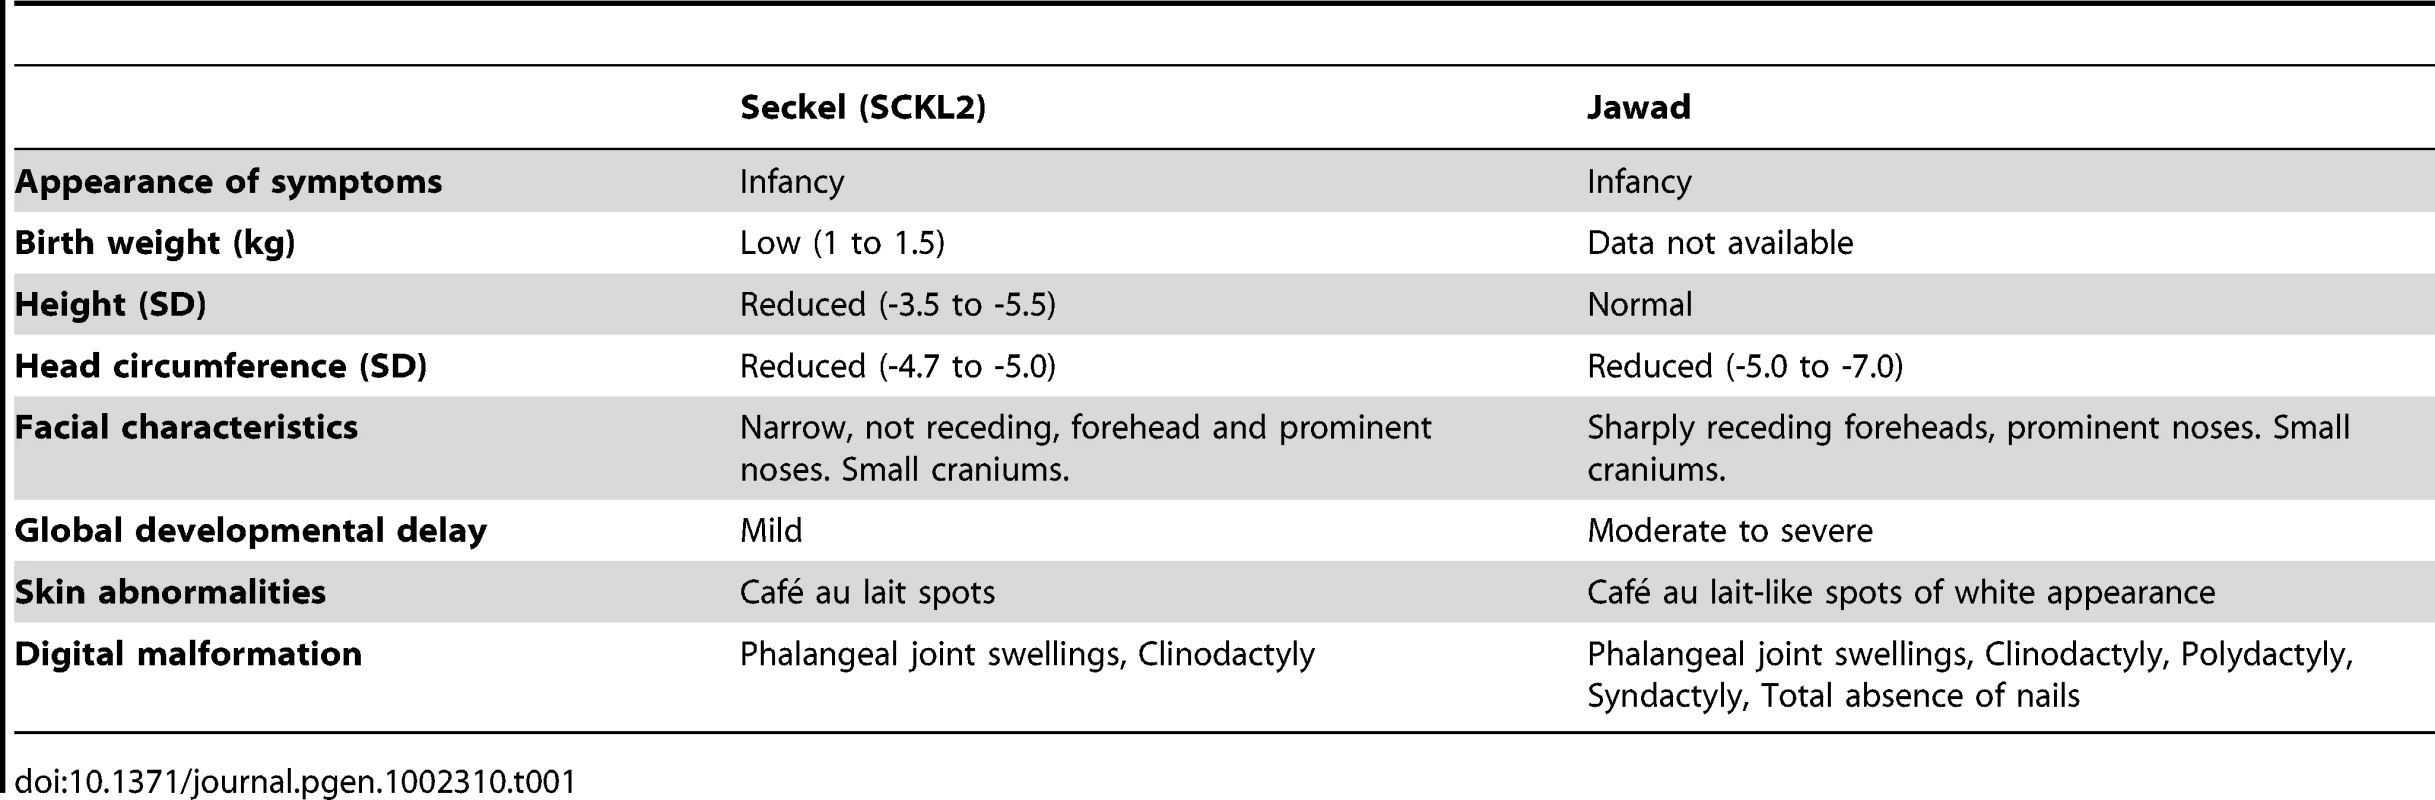 Comparison of clinical and morphometric findings in Seckel (&lt;b&gt;SCKL2)&lt;/b&gt; and Jawad patients.